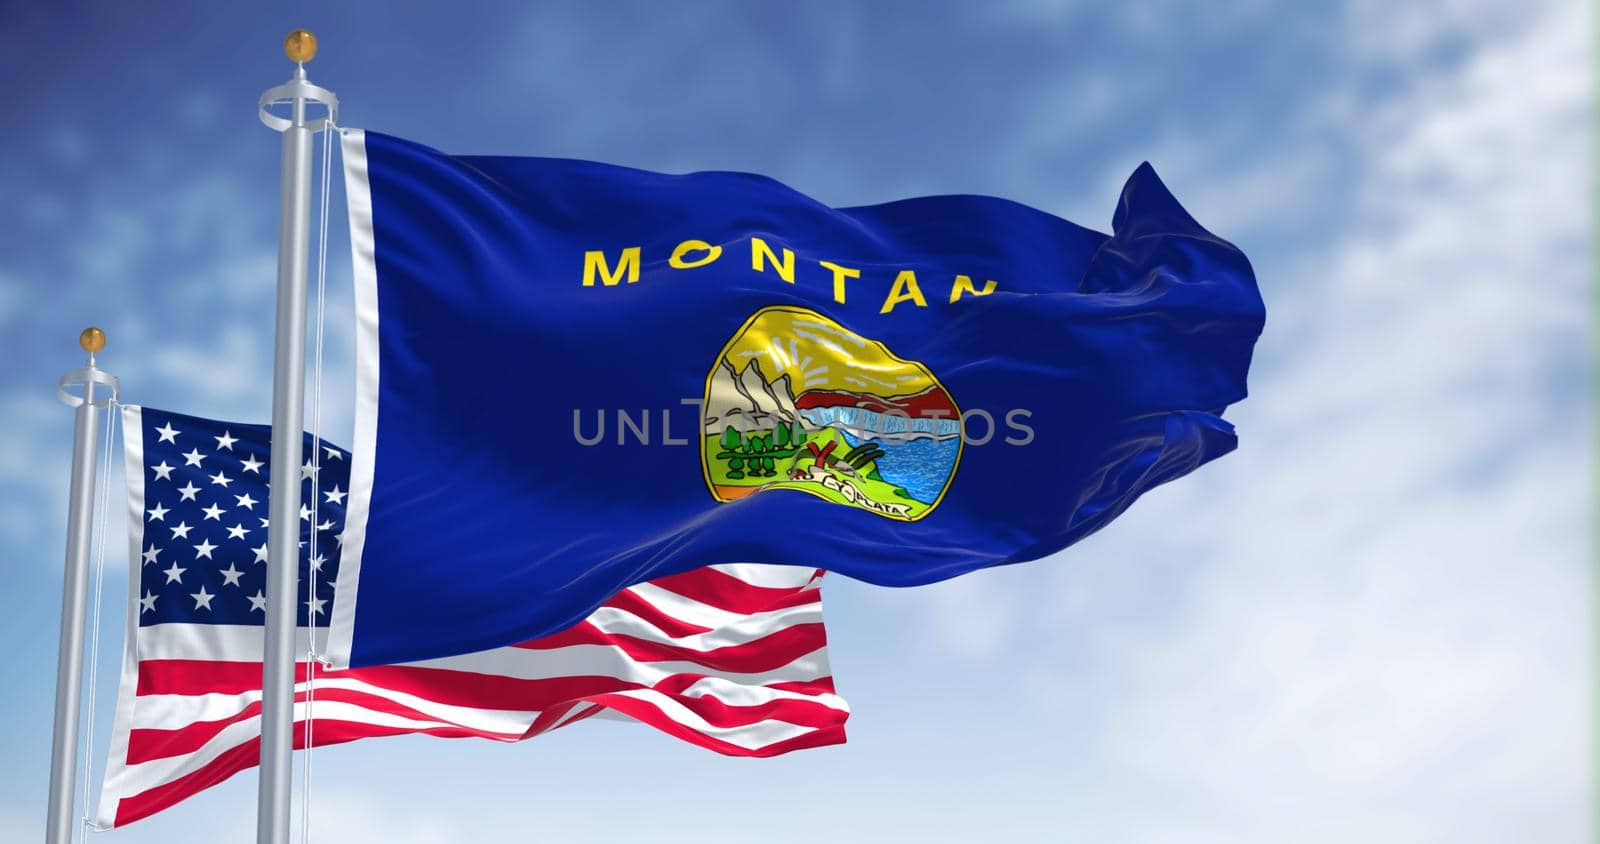 The Montana state flag waving along with the national flag of the United States of America. In the background there is a clear sky. Montana is a state in the western United States